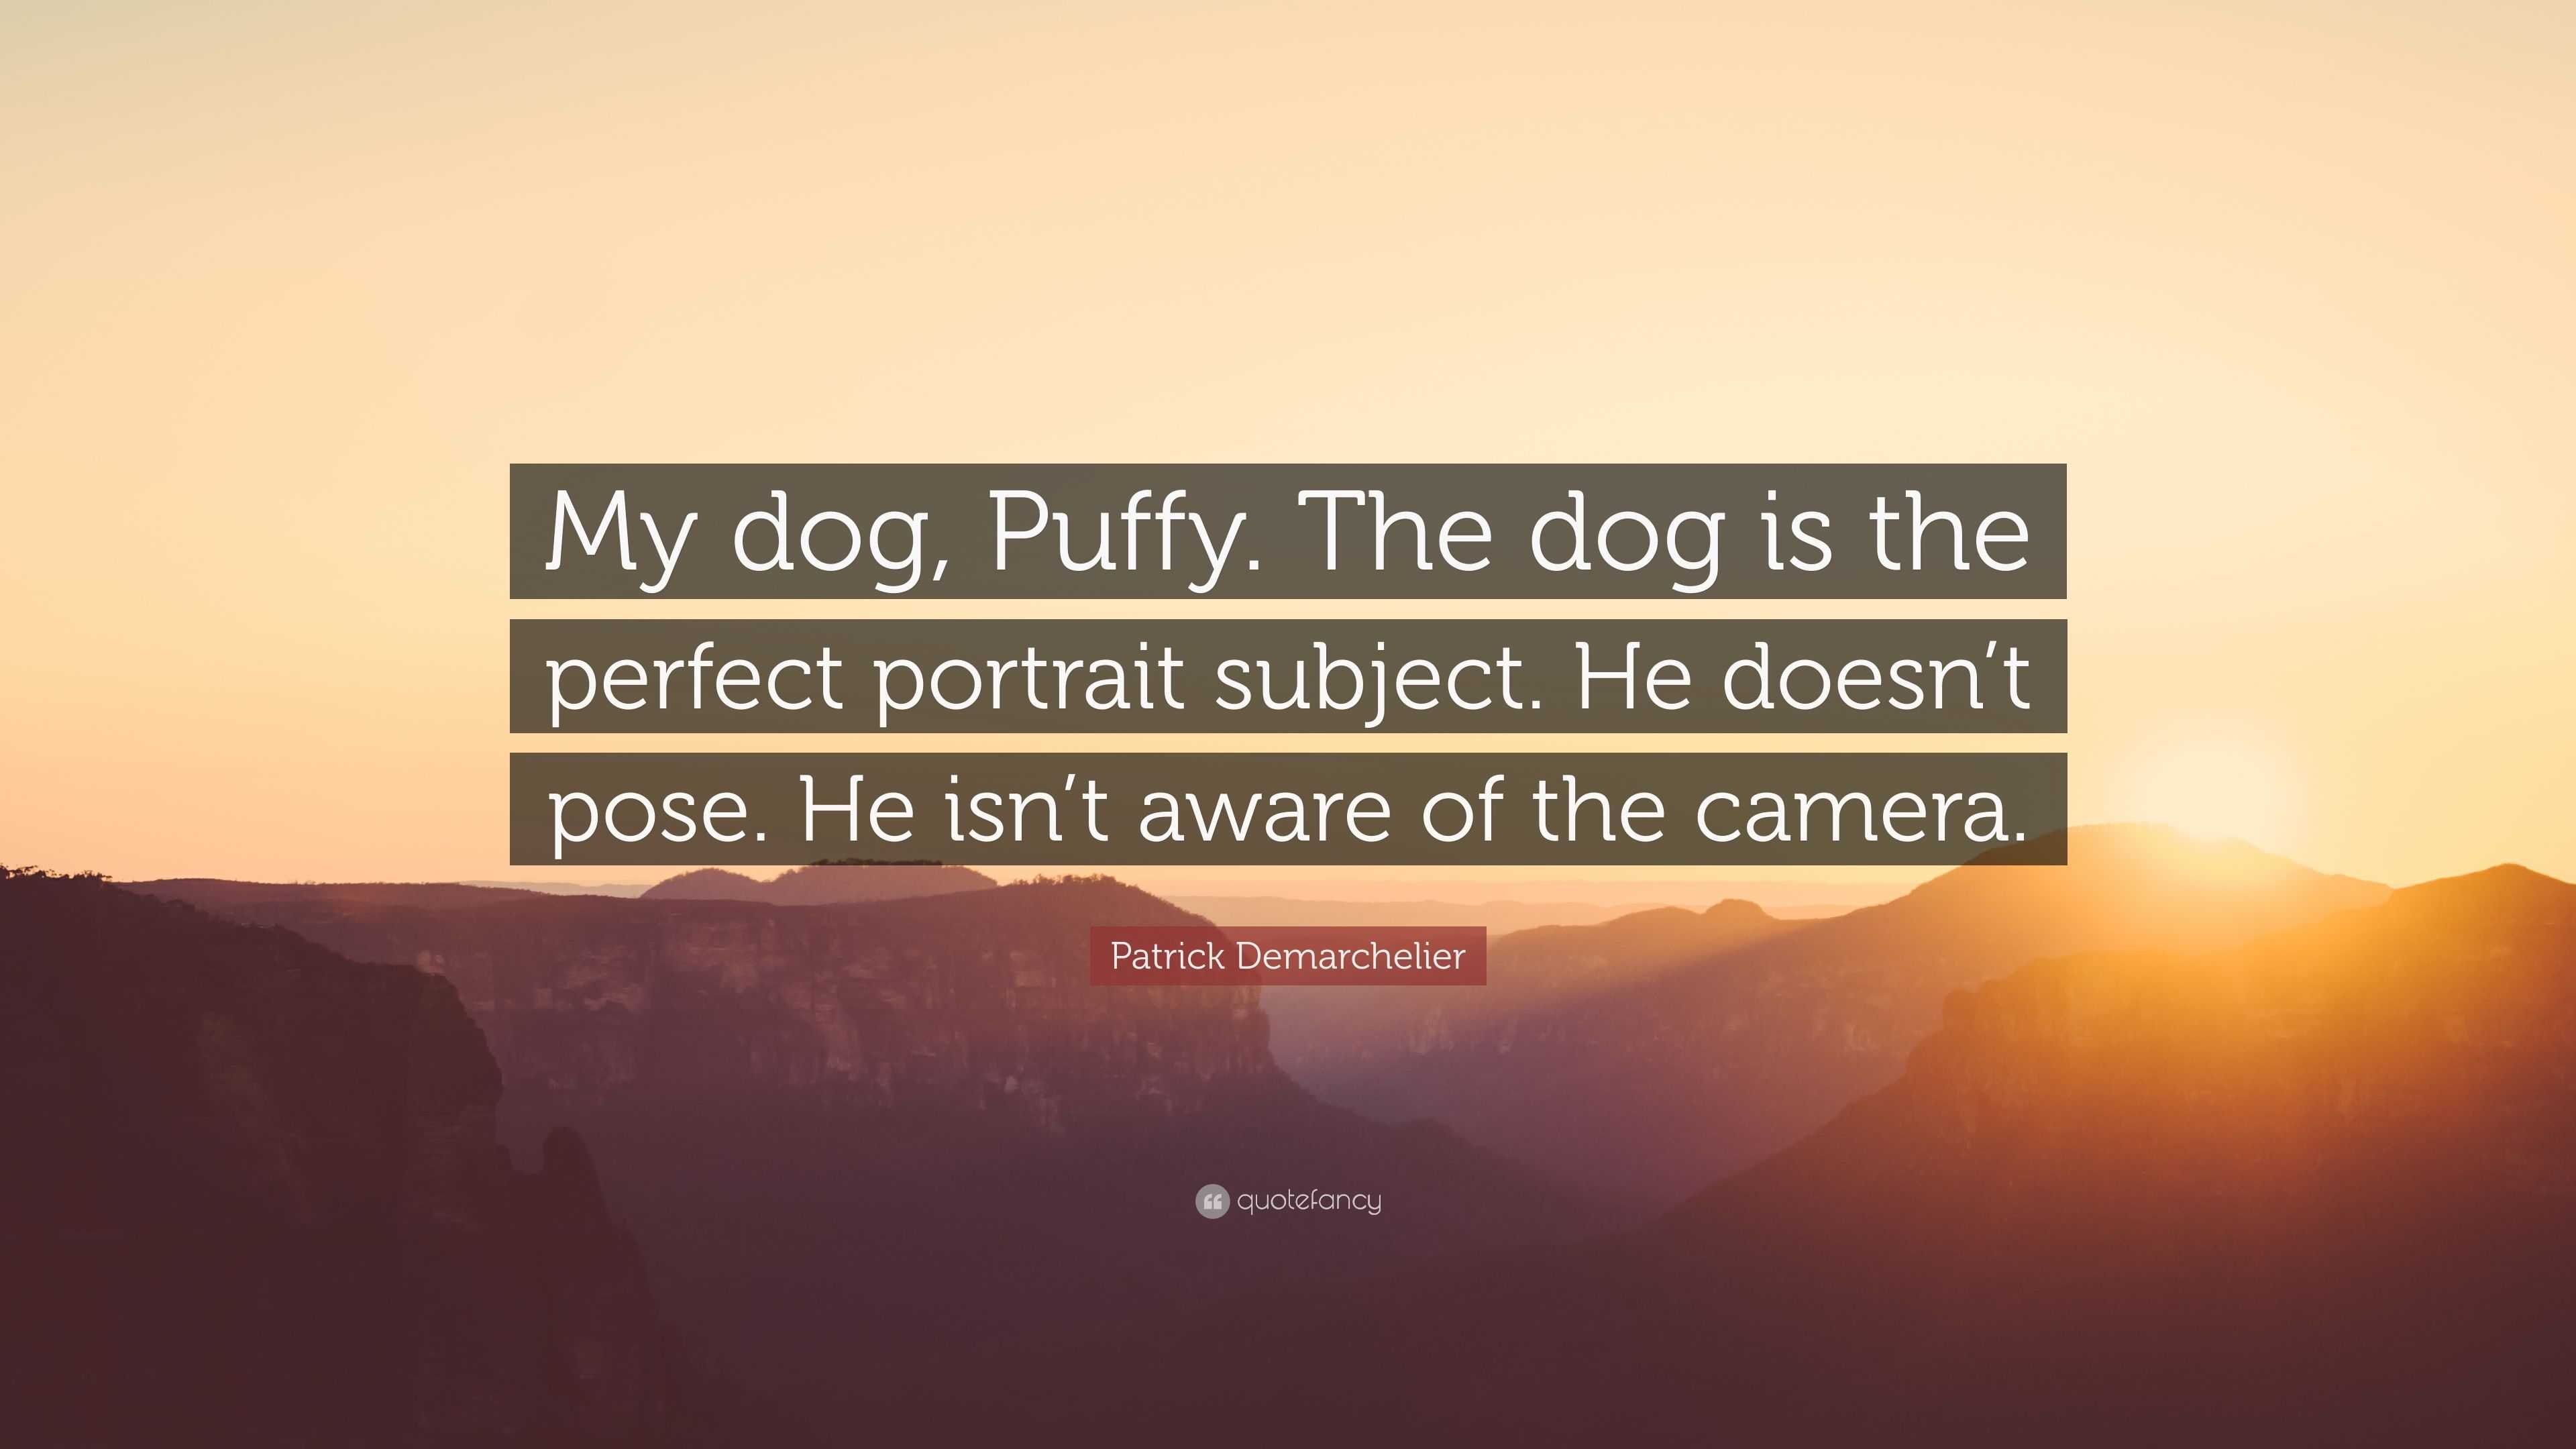 Patrick Demarchelier quote: My dog, Puffy. The dog is the perfect portrait  subject...